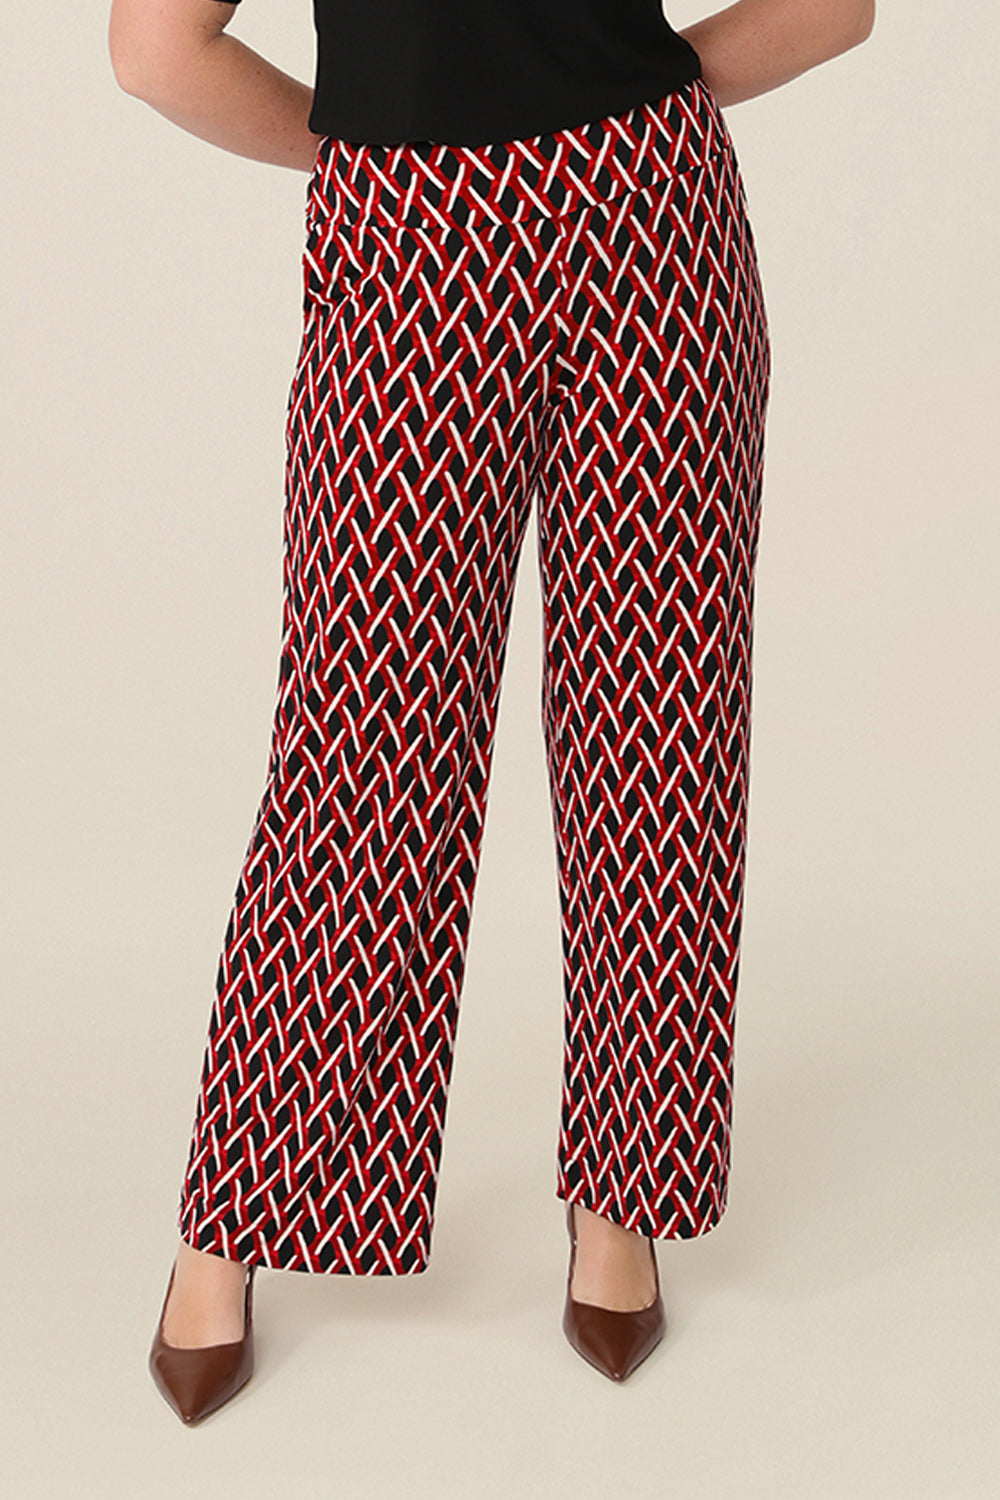 Good pants for curvy women, these geometric print pants are straight cut, wide leg trousers with a wide, pull-on waistband. Made in Australia by Australian fashion brand, Leina & Fleur shop online now in sizes 8 to 24.